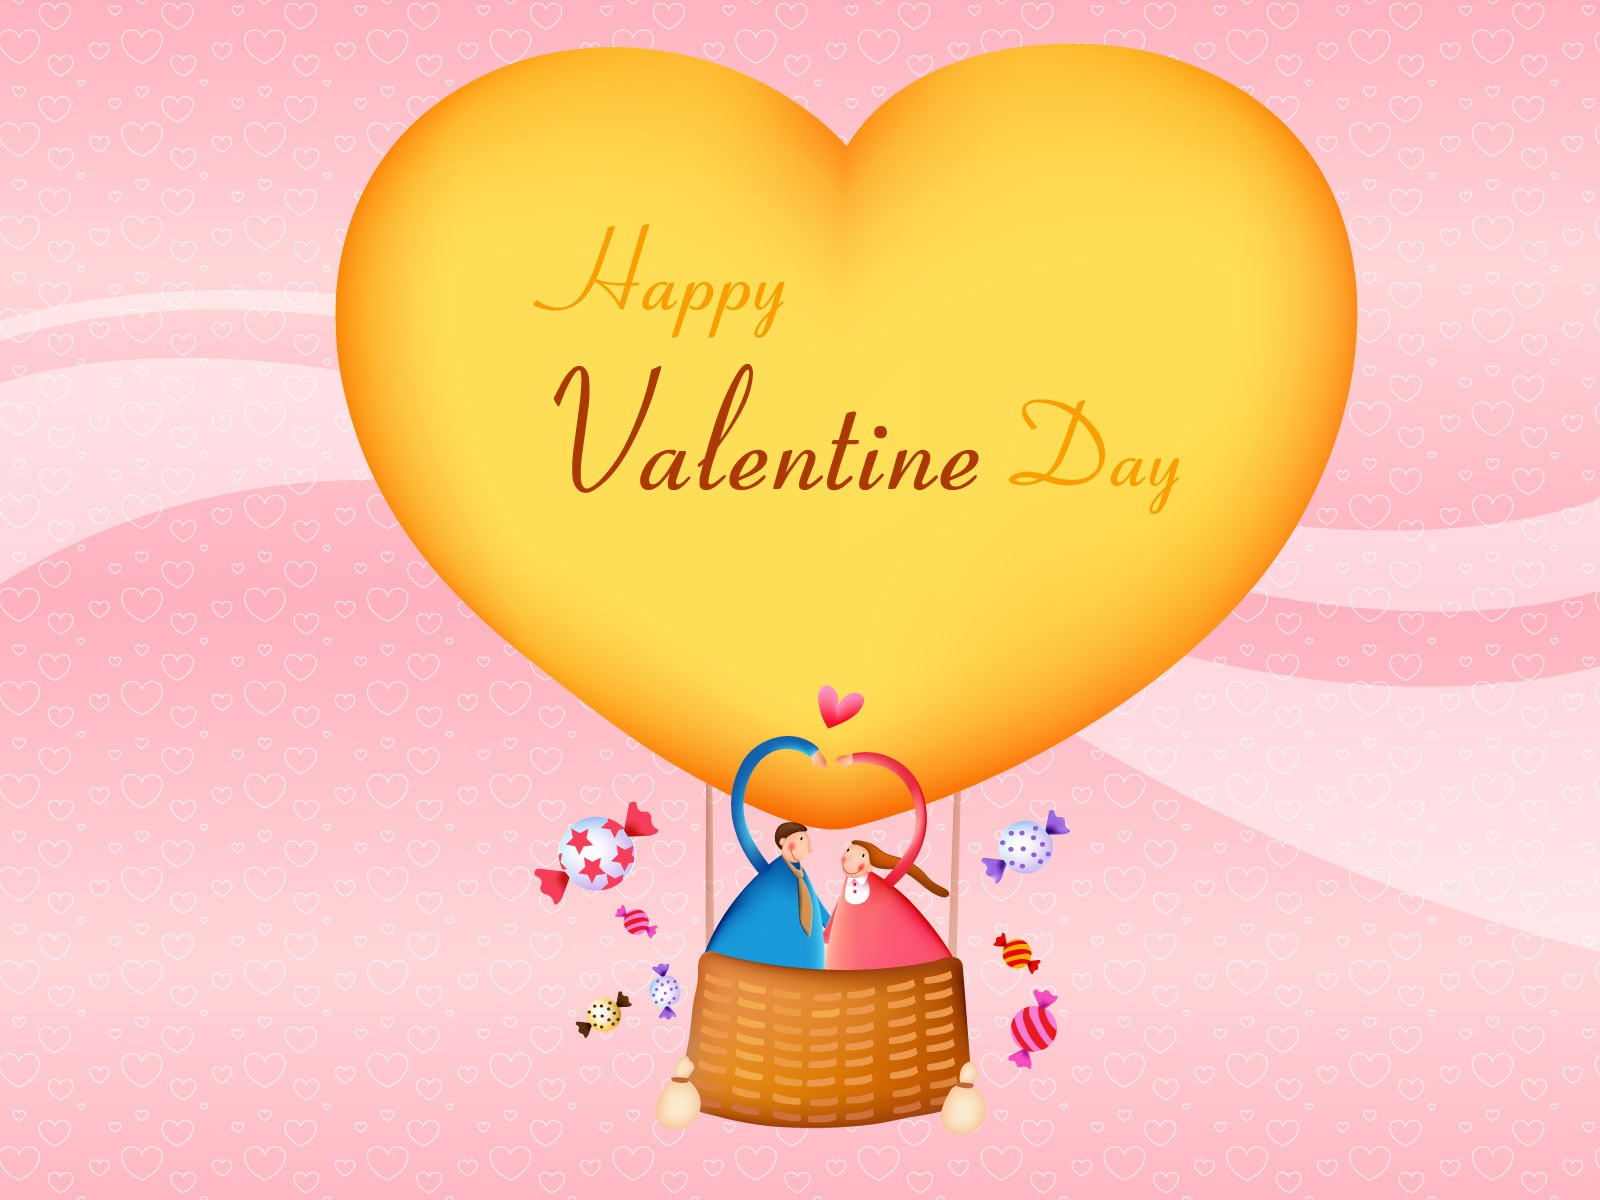 Valentine's Day Theme Wallpapers (2) #14 - 1600x1200